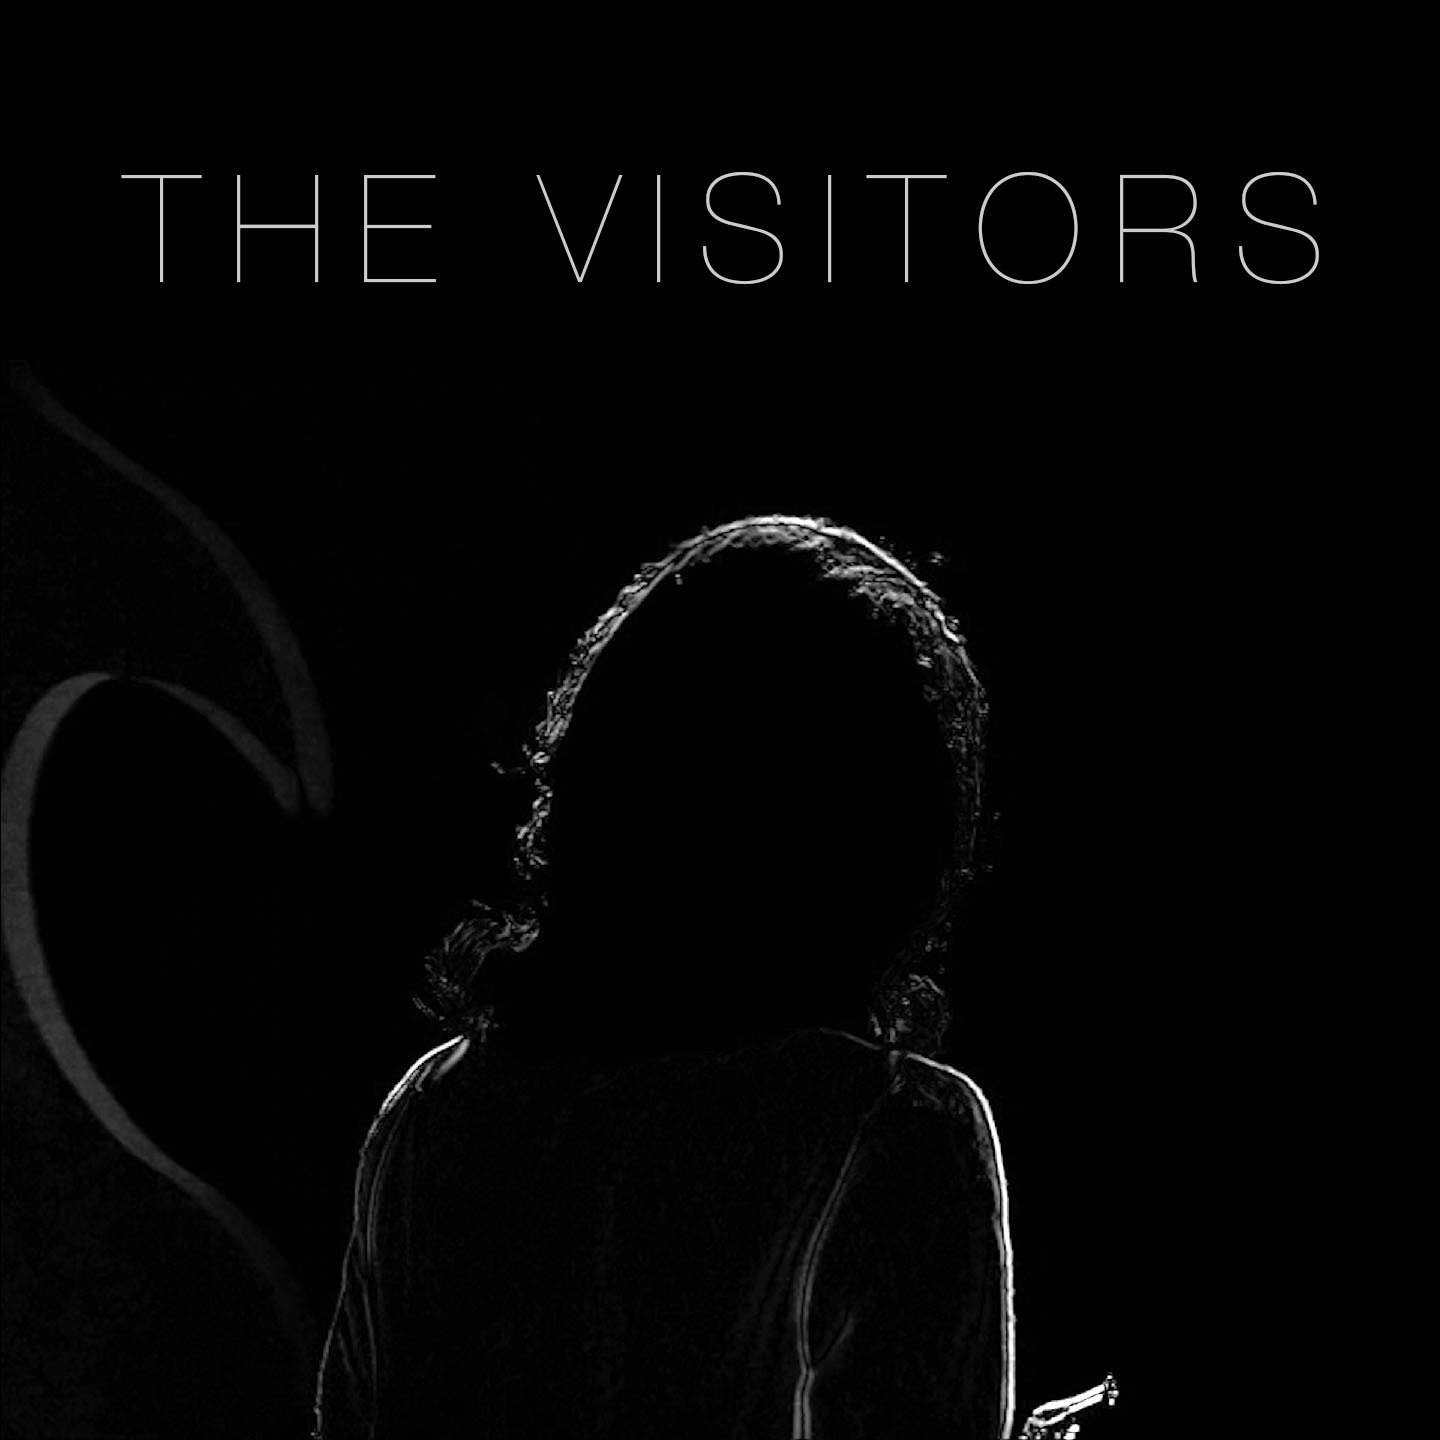 the-visitors-cover copy.JPG